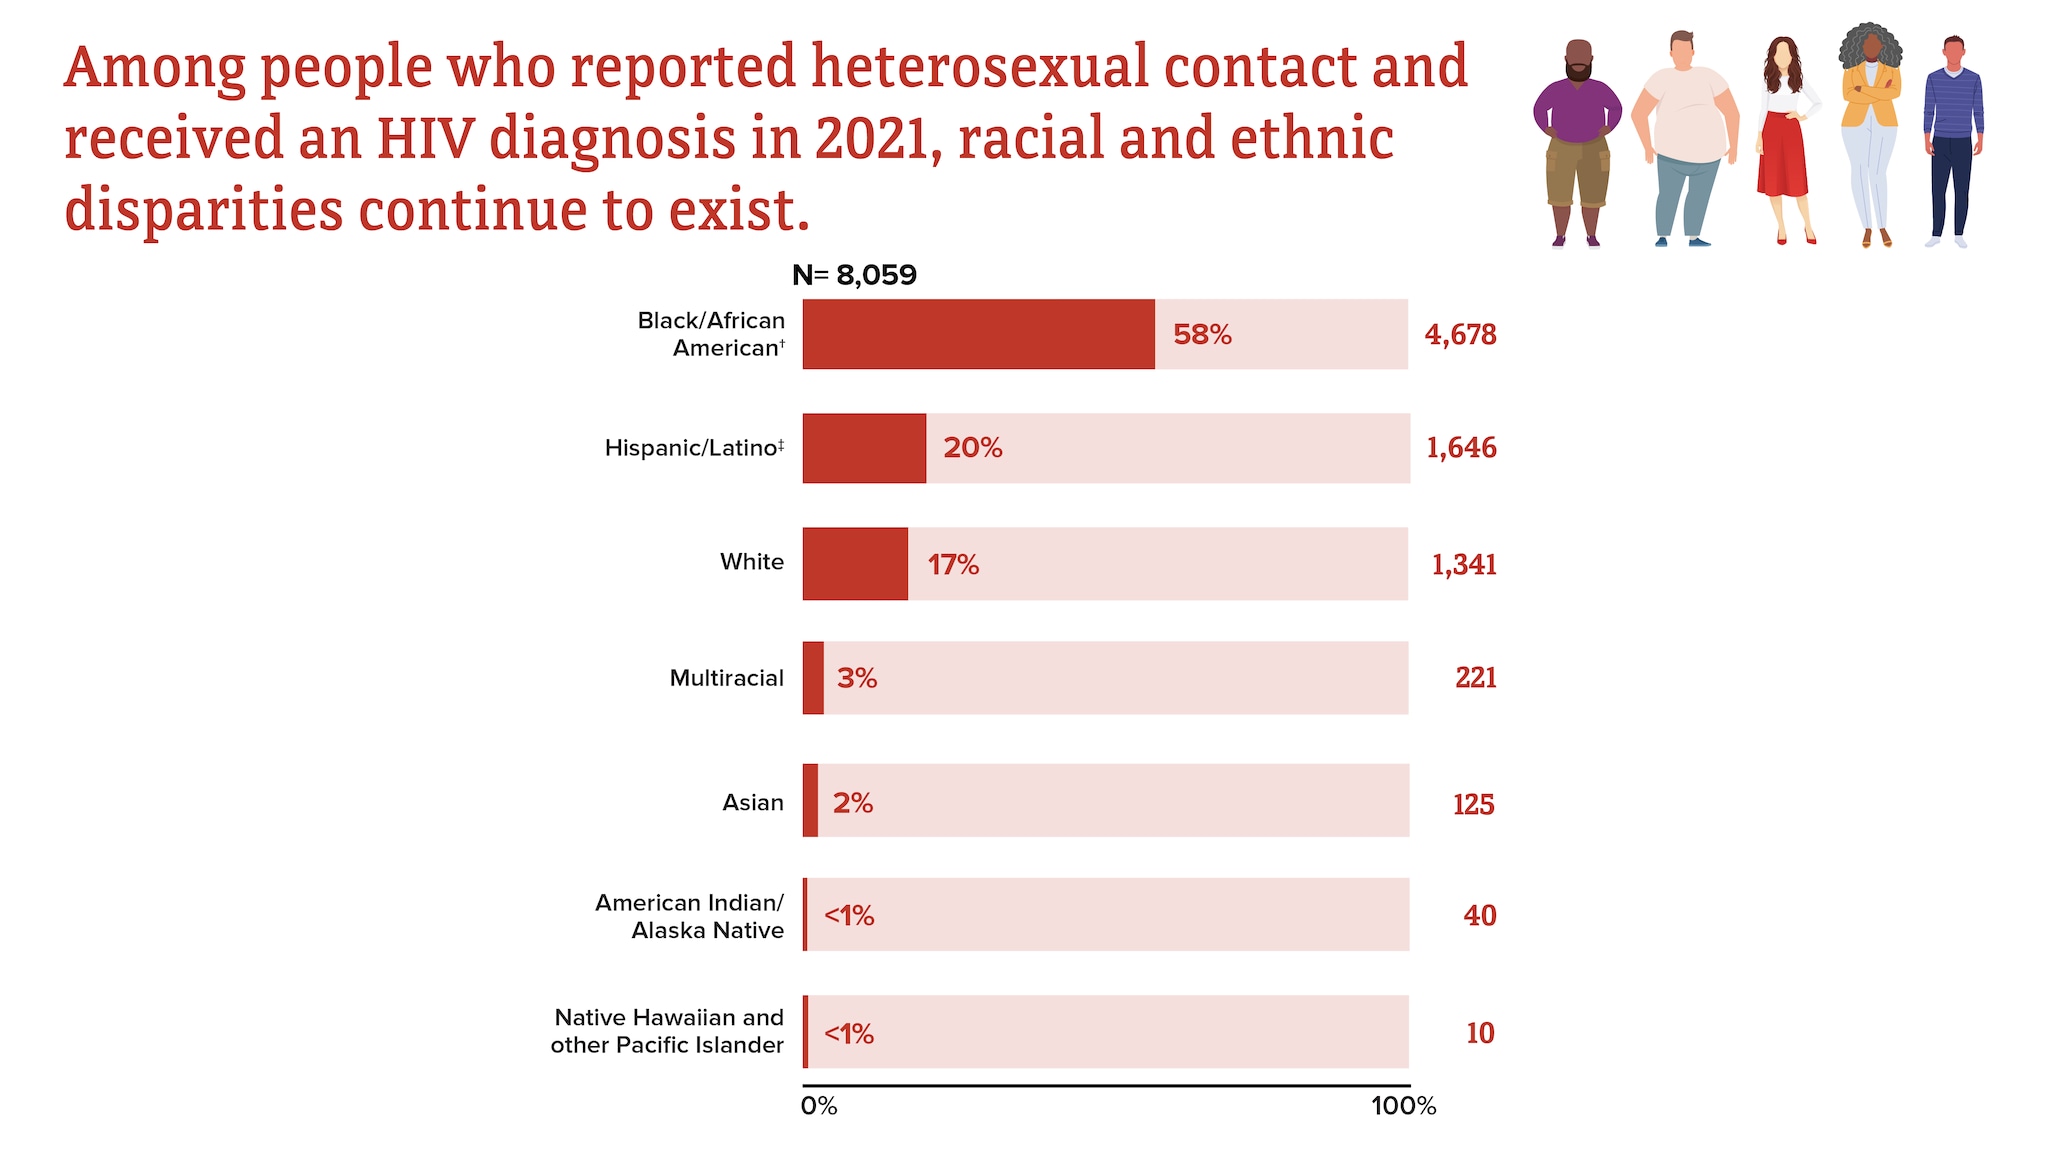 Among people who reported heterosexual contact and received an HIV diagnosis in 2021, racial and ethnic disparities continue to exist. Black/African American people received an HIV diagnosis most frequently, followed by Hispanic/Latino, White, multiracial, Asian, American Indian/Alaska Native, and Native Hawaiian and other Pacific Islander people, respectively.